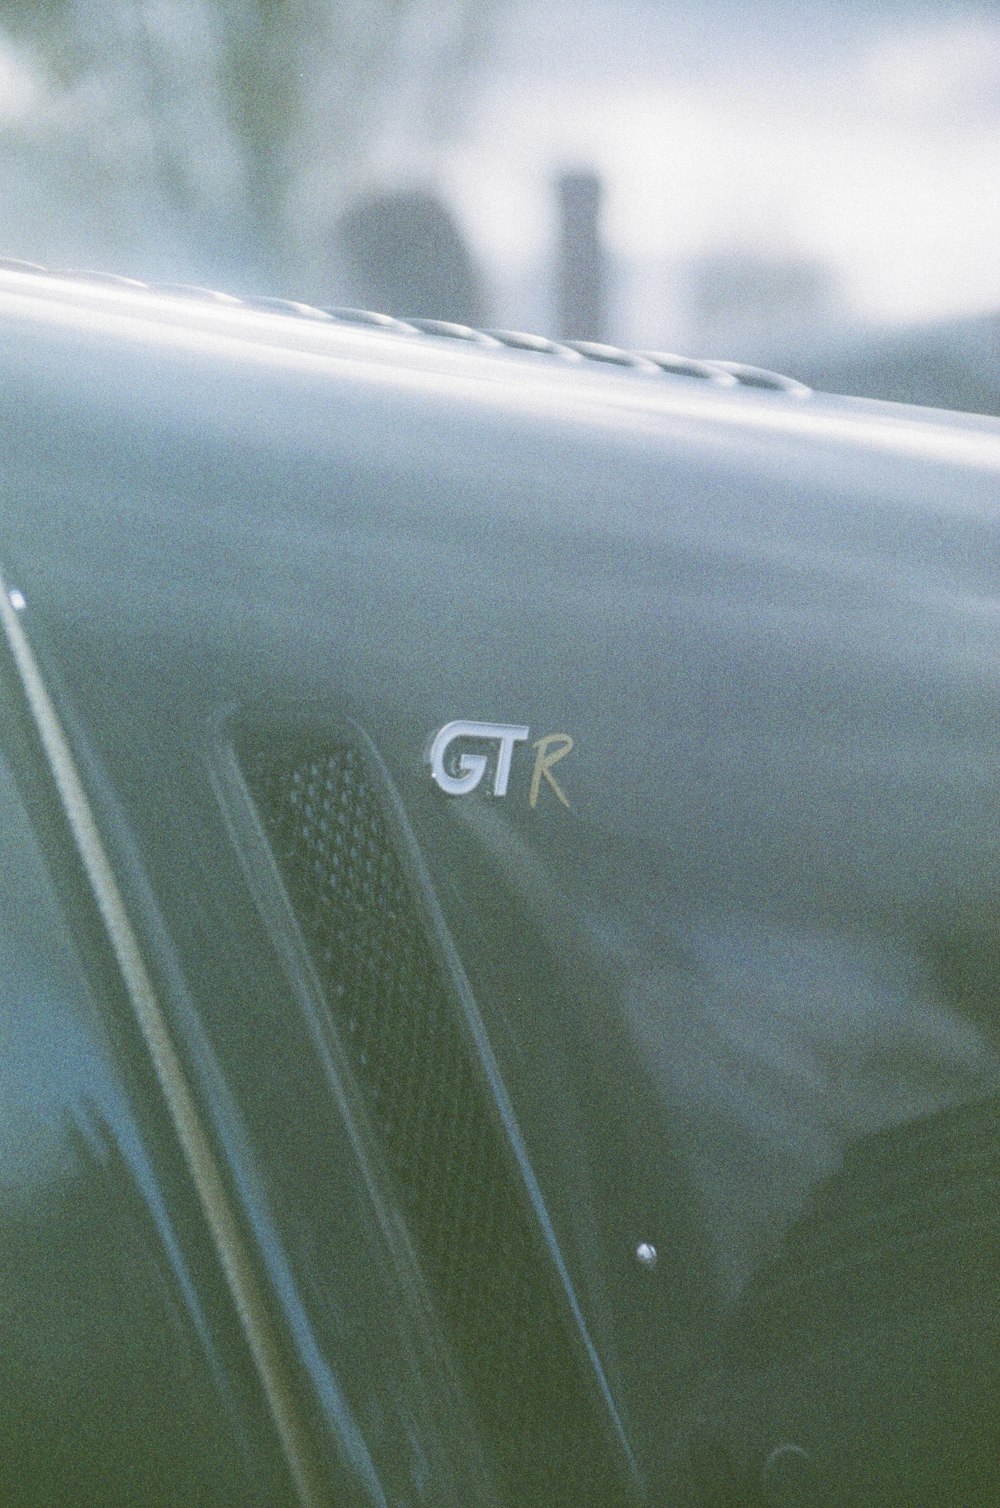 a close up of a car door with the word gtr on it